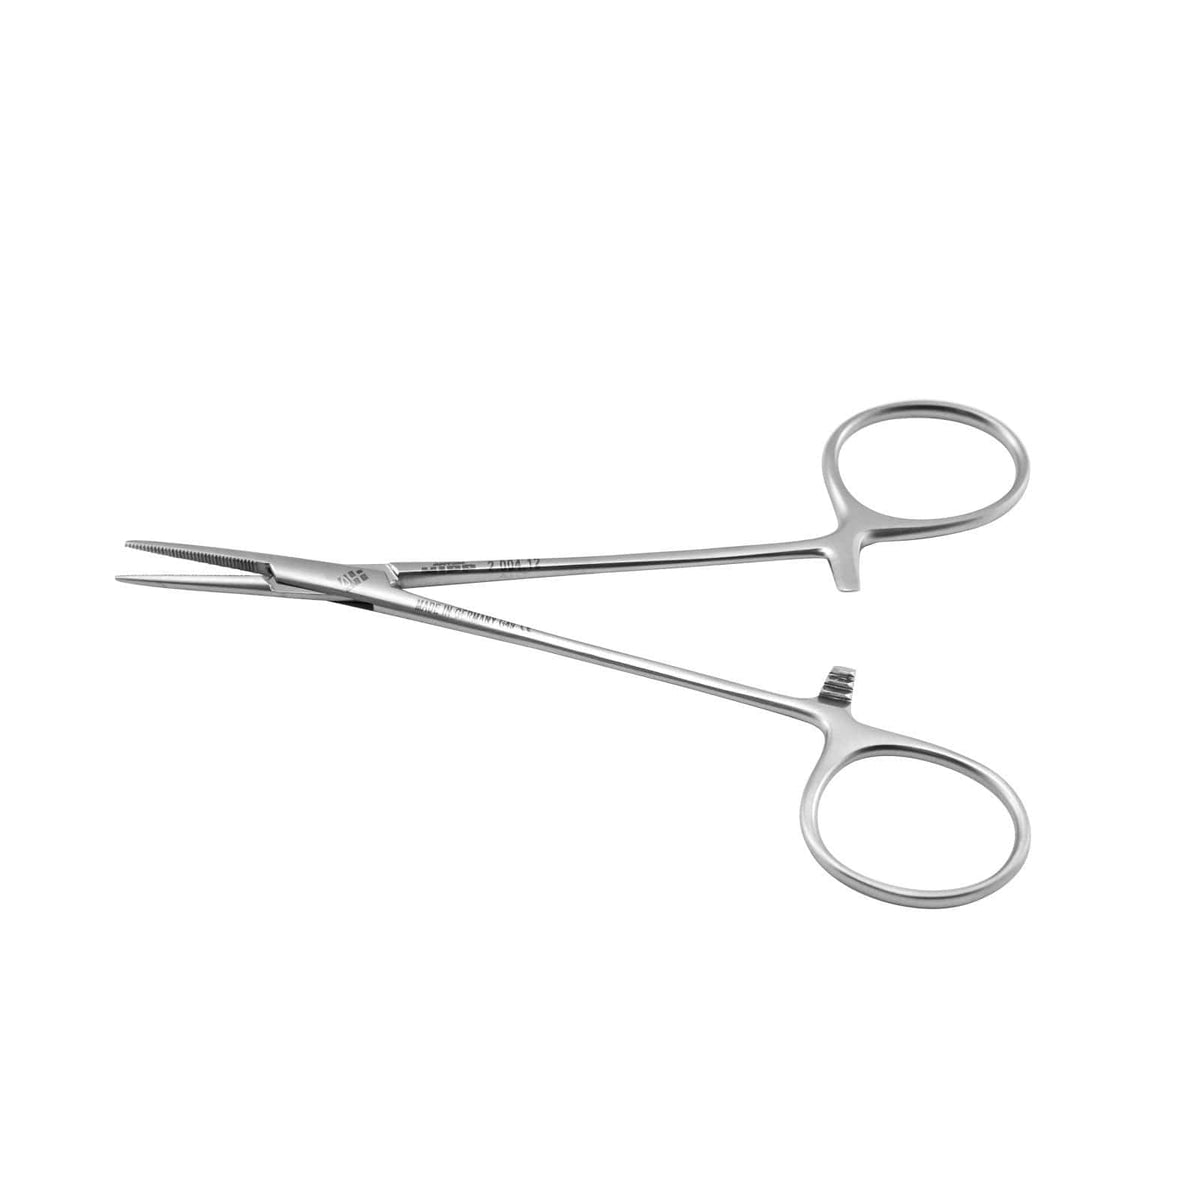 Hipp Surgical Instruments 12.5cm / Straight / Standard Hipp Halsted Mosquito Forceps